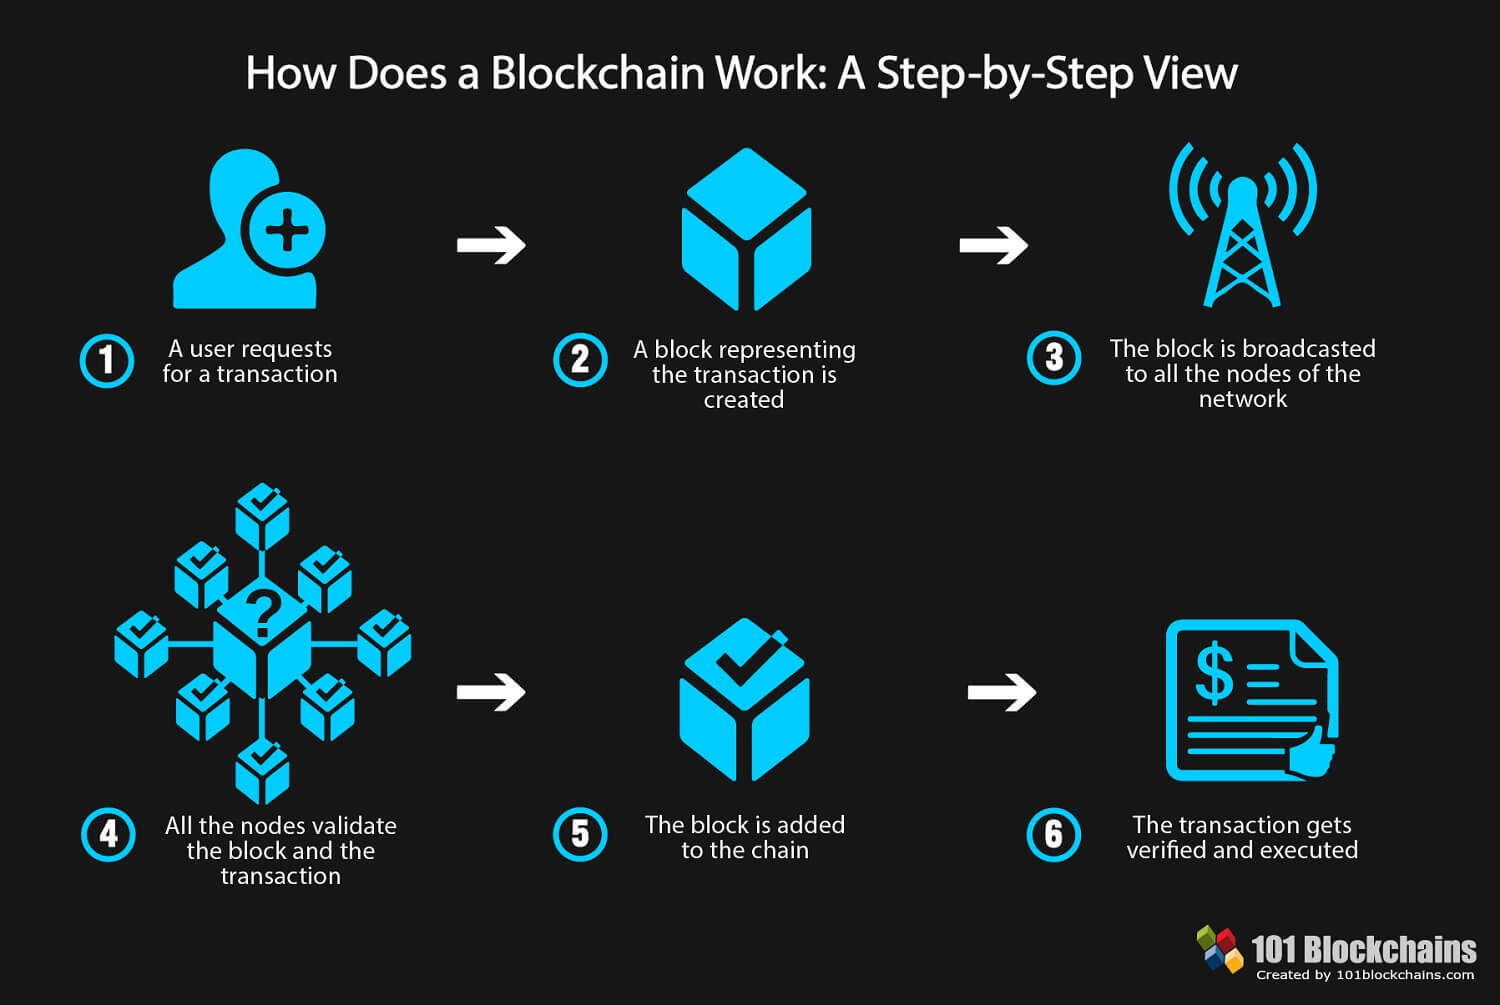 How Does a Blockchain work=